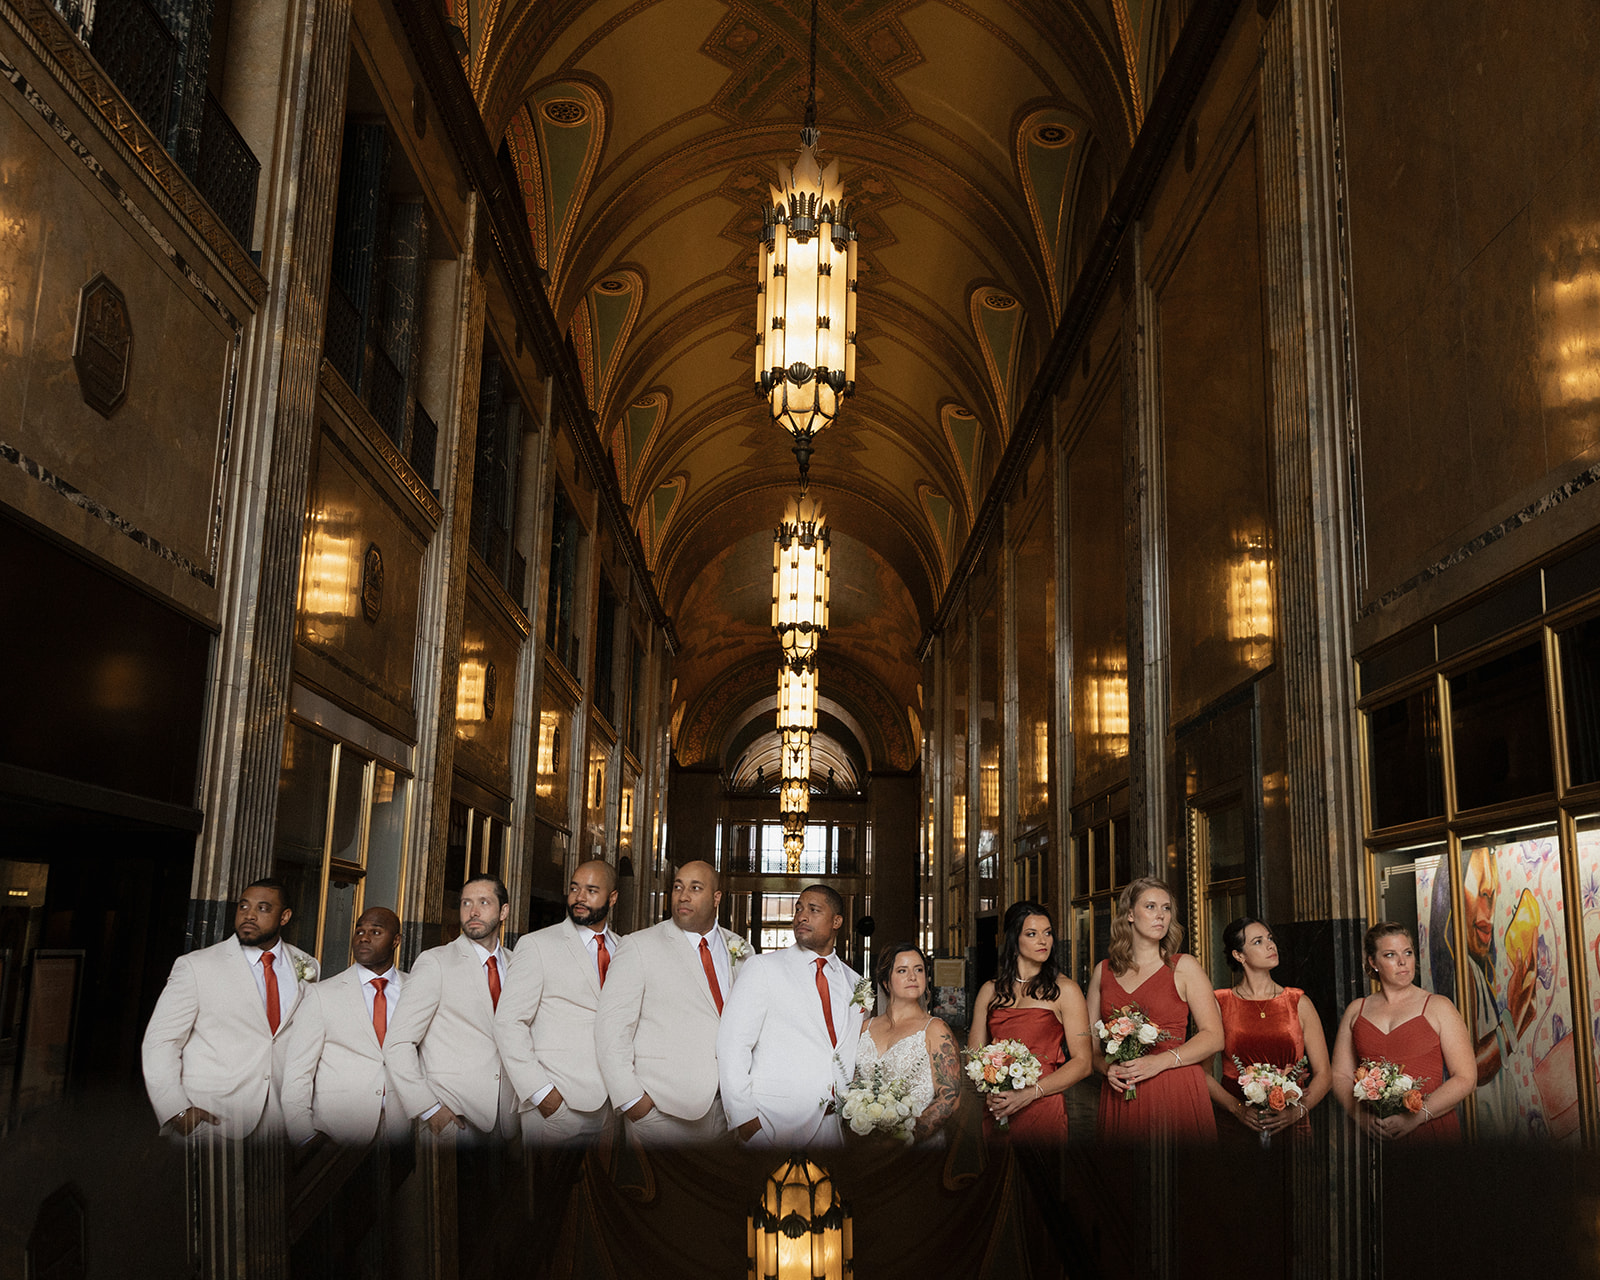 Wedding party portraits in the Grand Arcade of Fisher Building in Detroit, Michigan